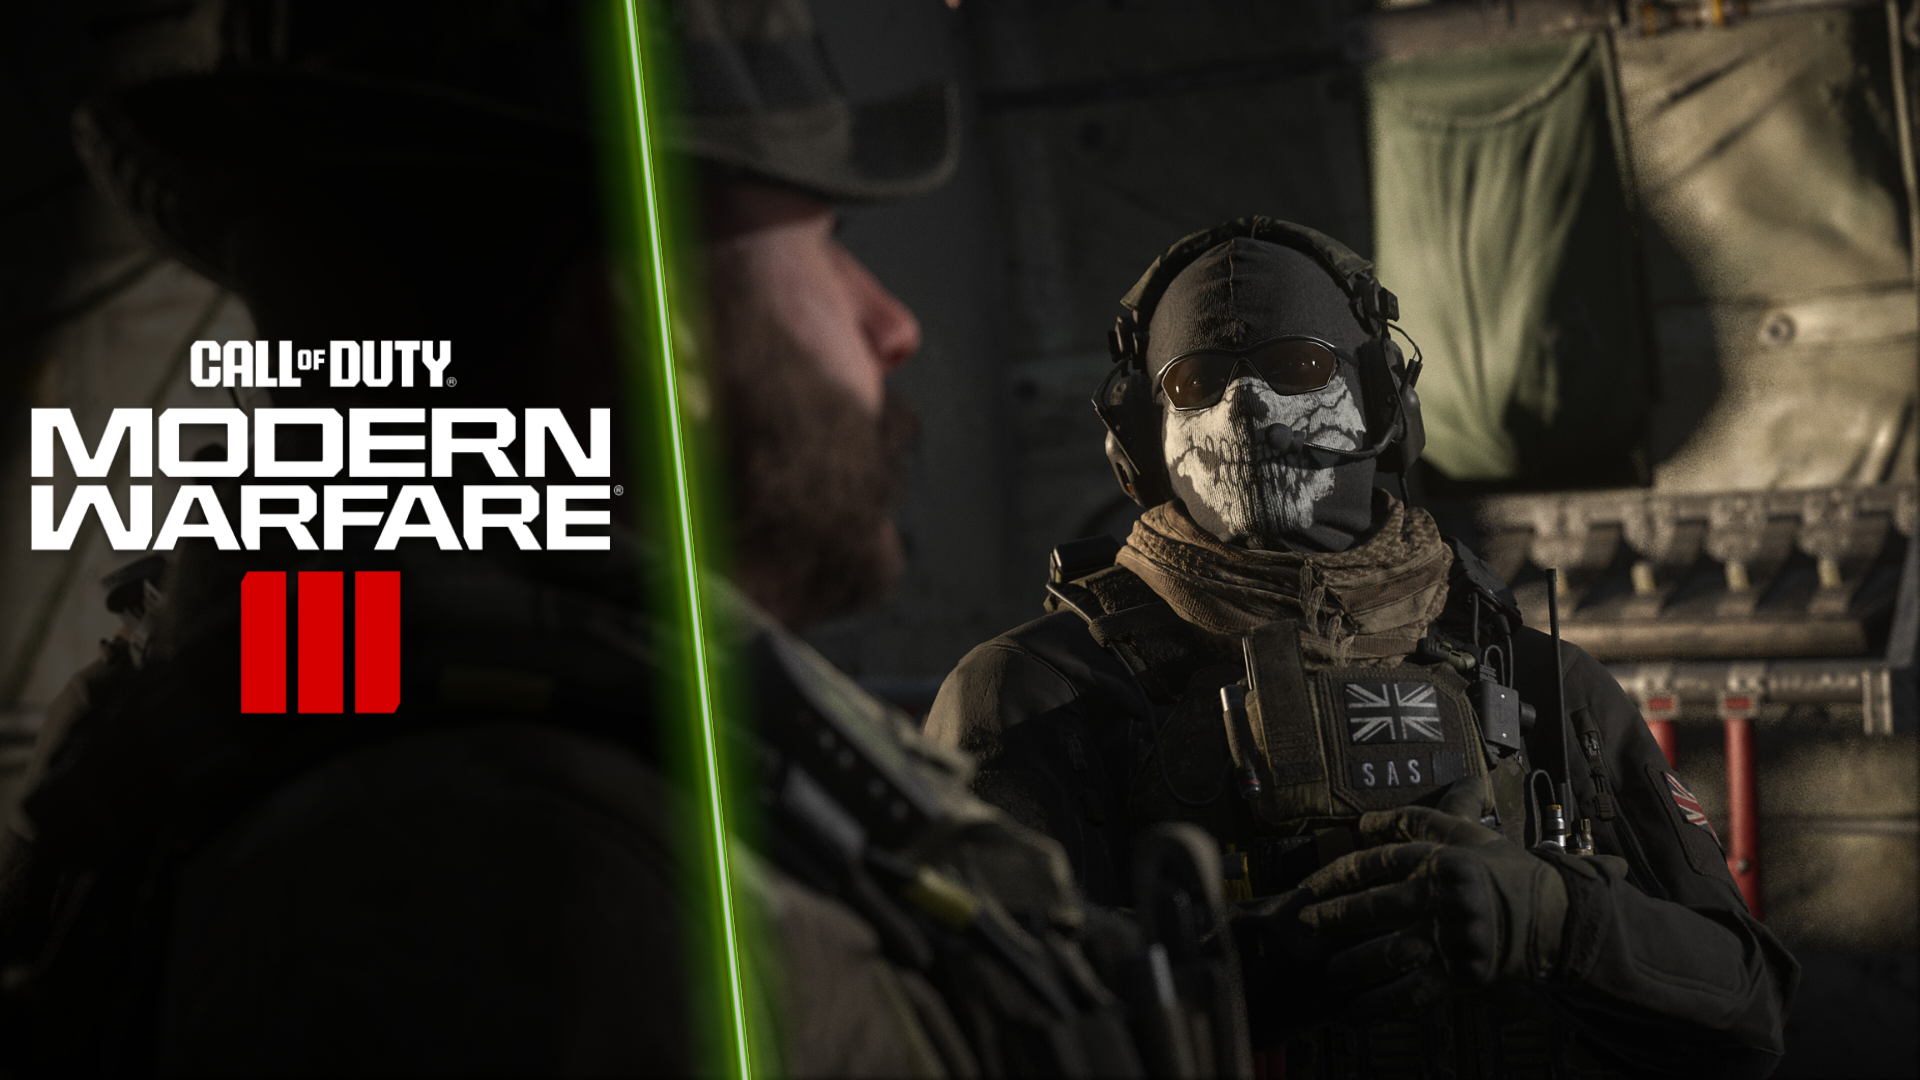 Modern Warfare 3 Early Access Plagued with Issues - FandomWire